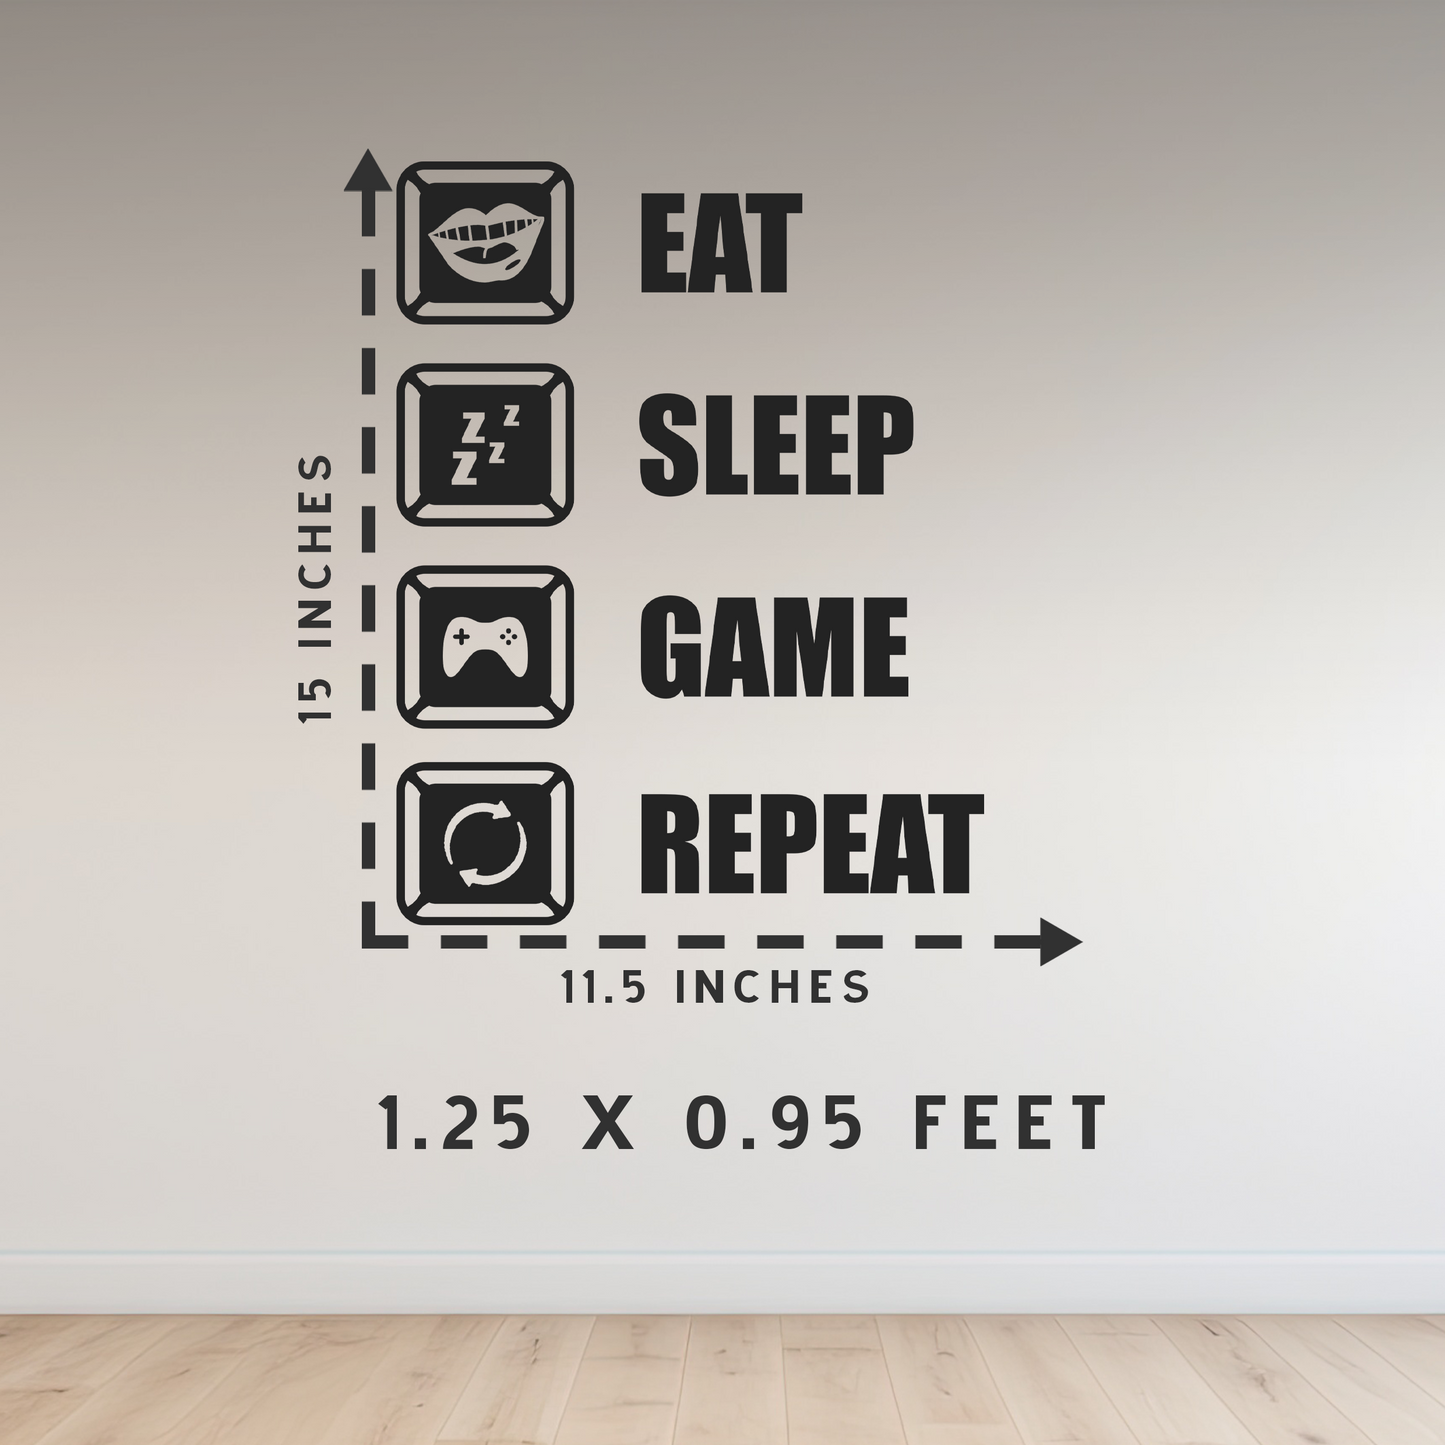 Game Repeat Wall Sticker Decal